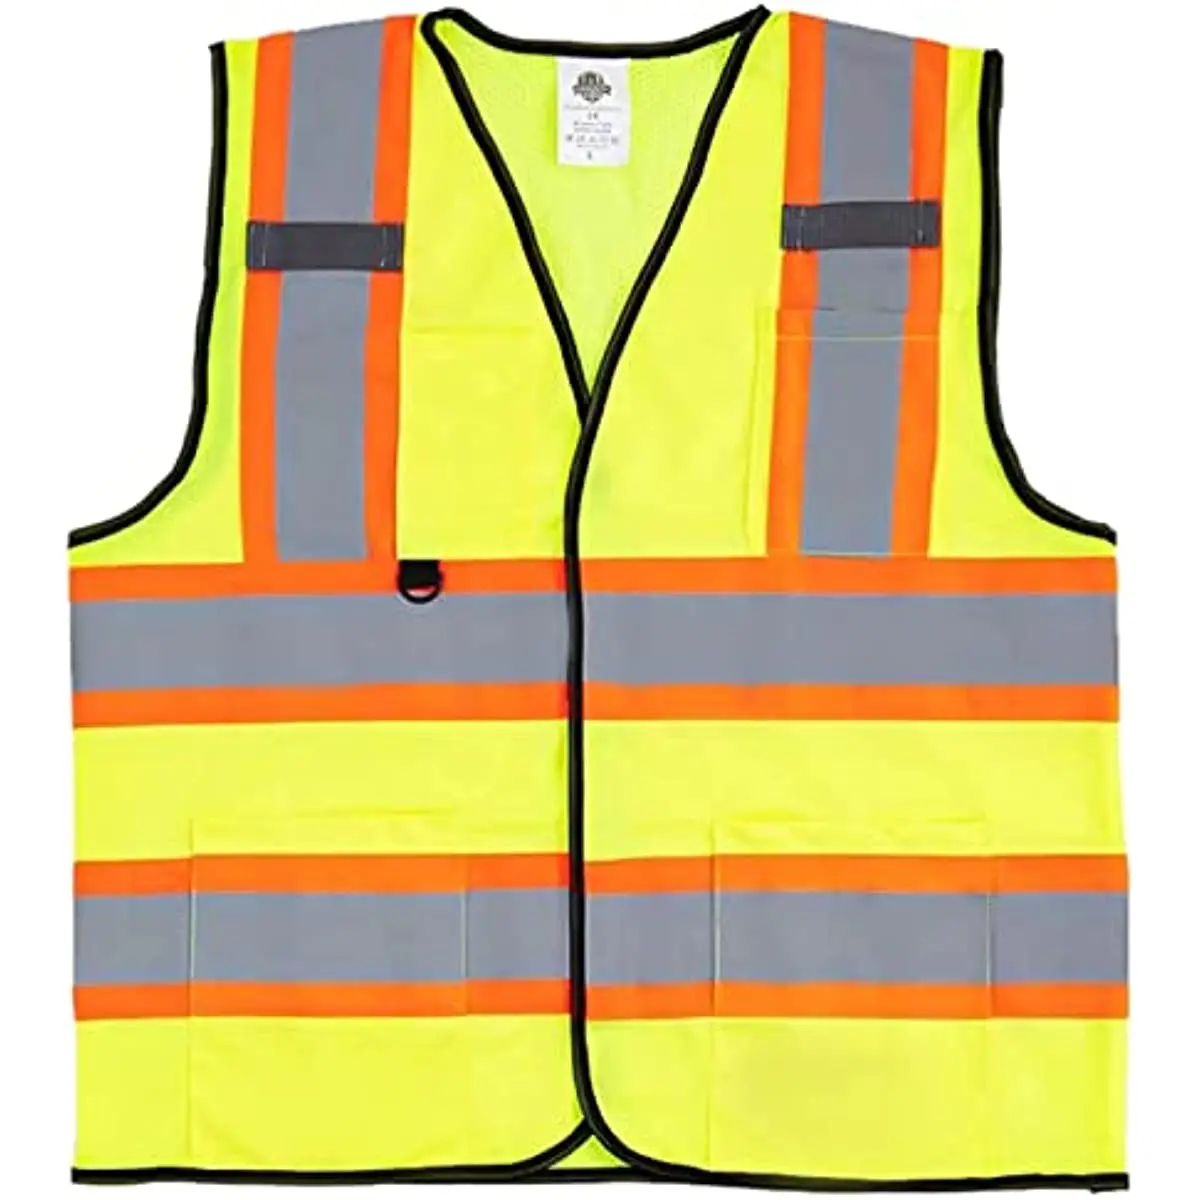 Dazonity High Visibility Safety Vest with Multi Pockets, Reflective Strips, Fit for Men & Women, Work, Construction, enlarge